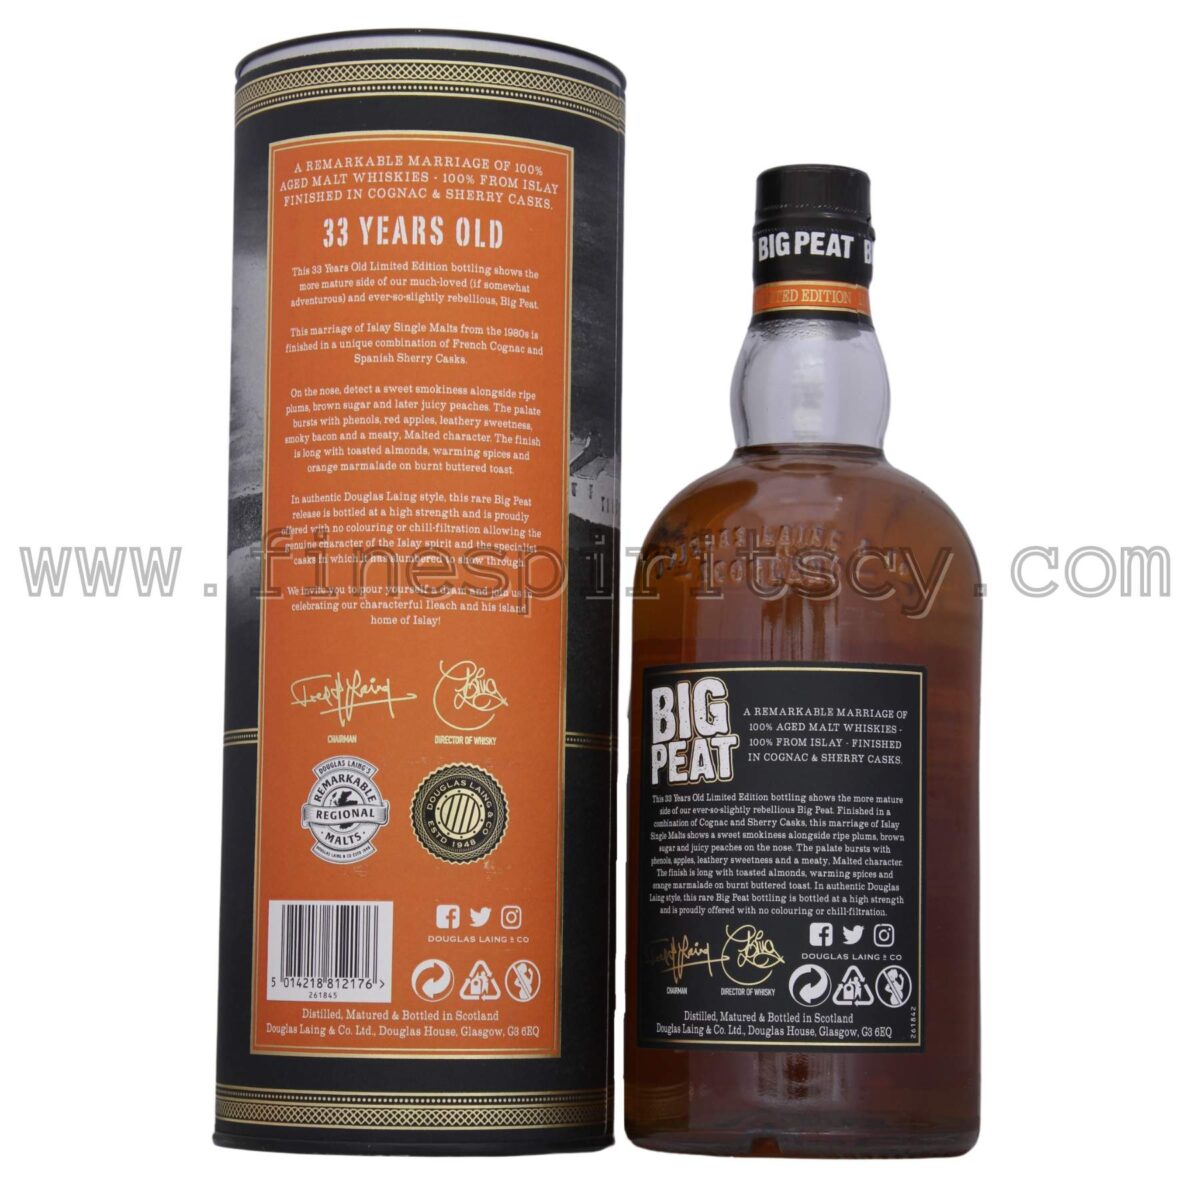 Big Peat 27 Years Old Cognac & Sherry Cask Finish Order Online Scotch Europe CY